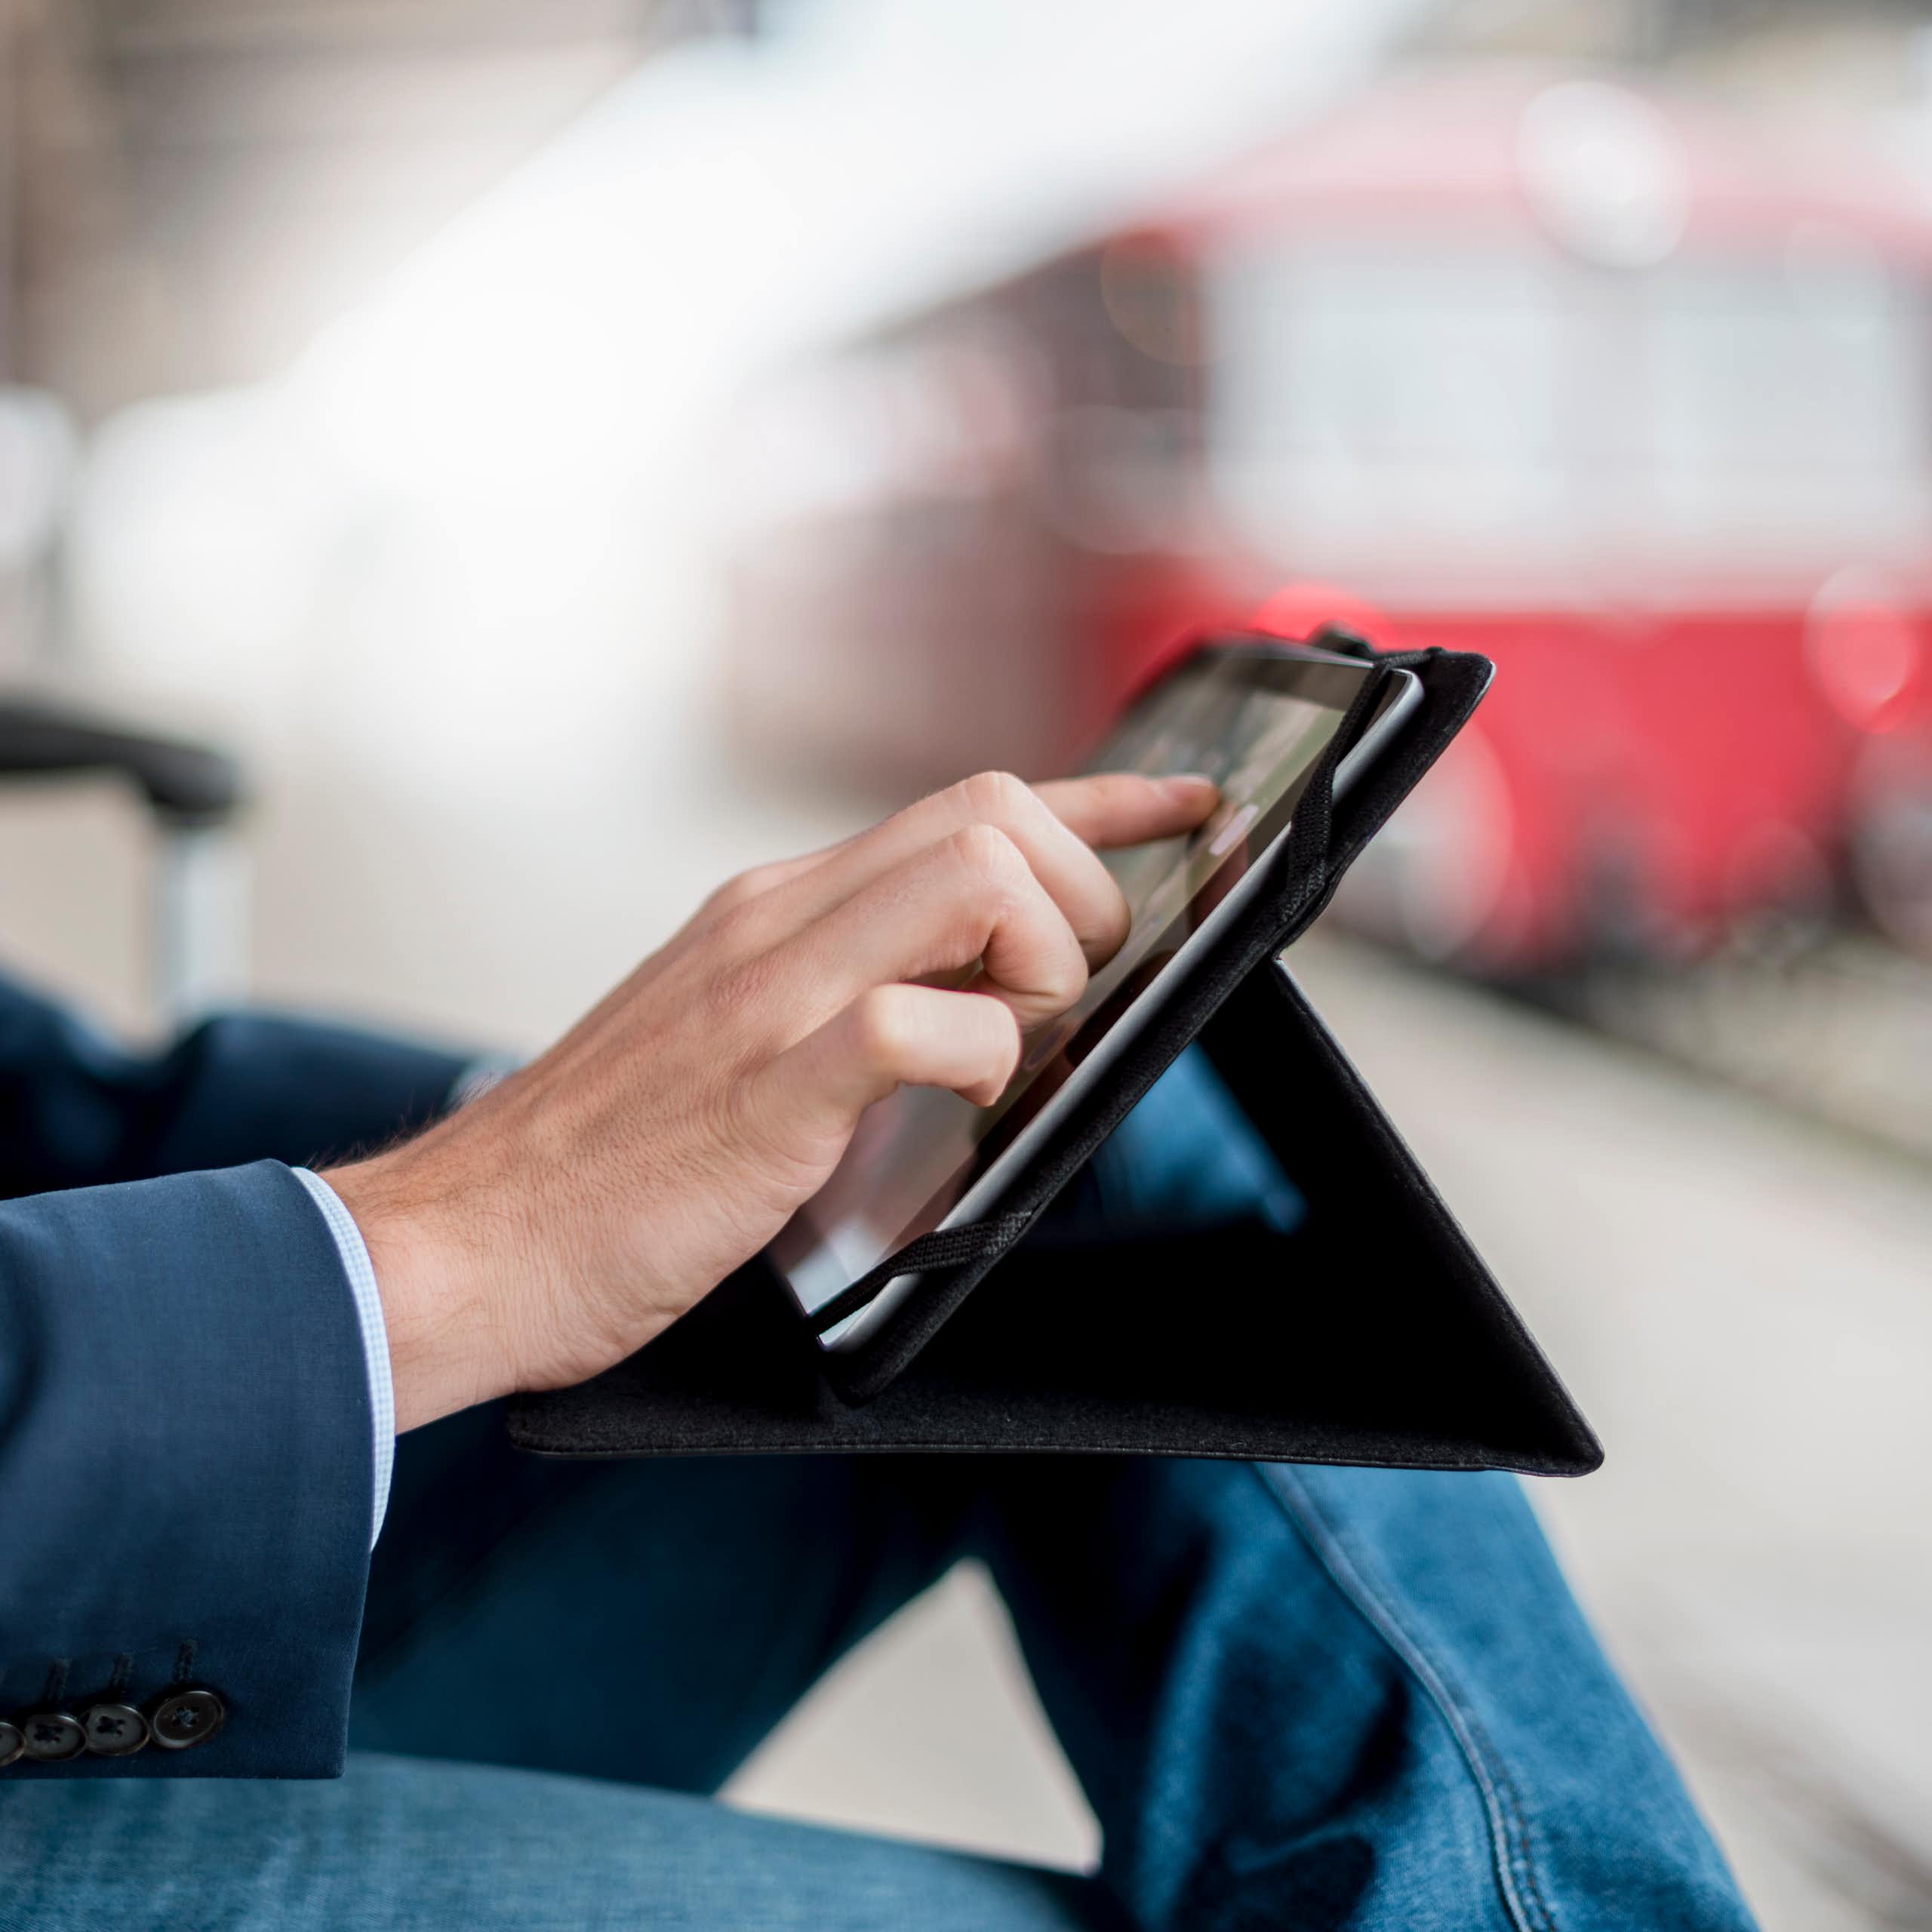 A businessman in a suit is seen using a tablet computer in a train station.